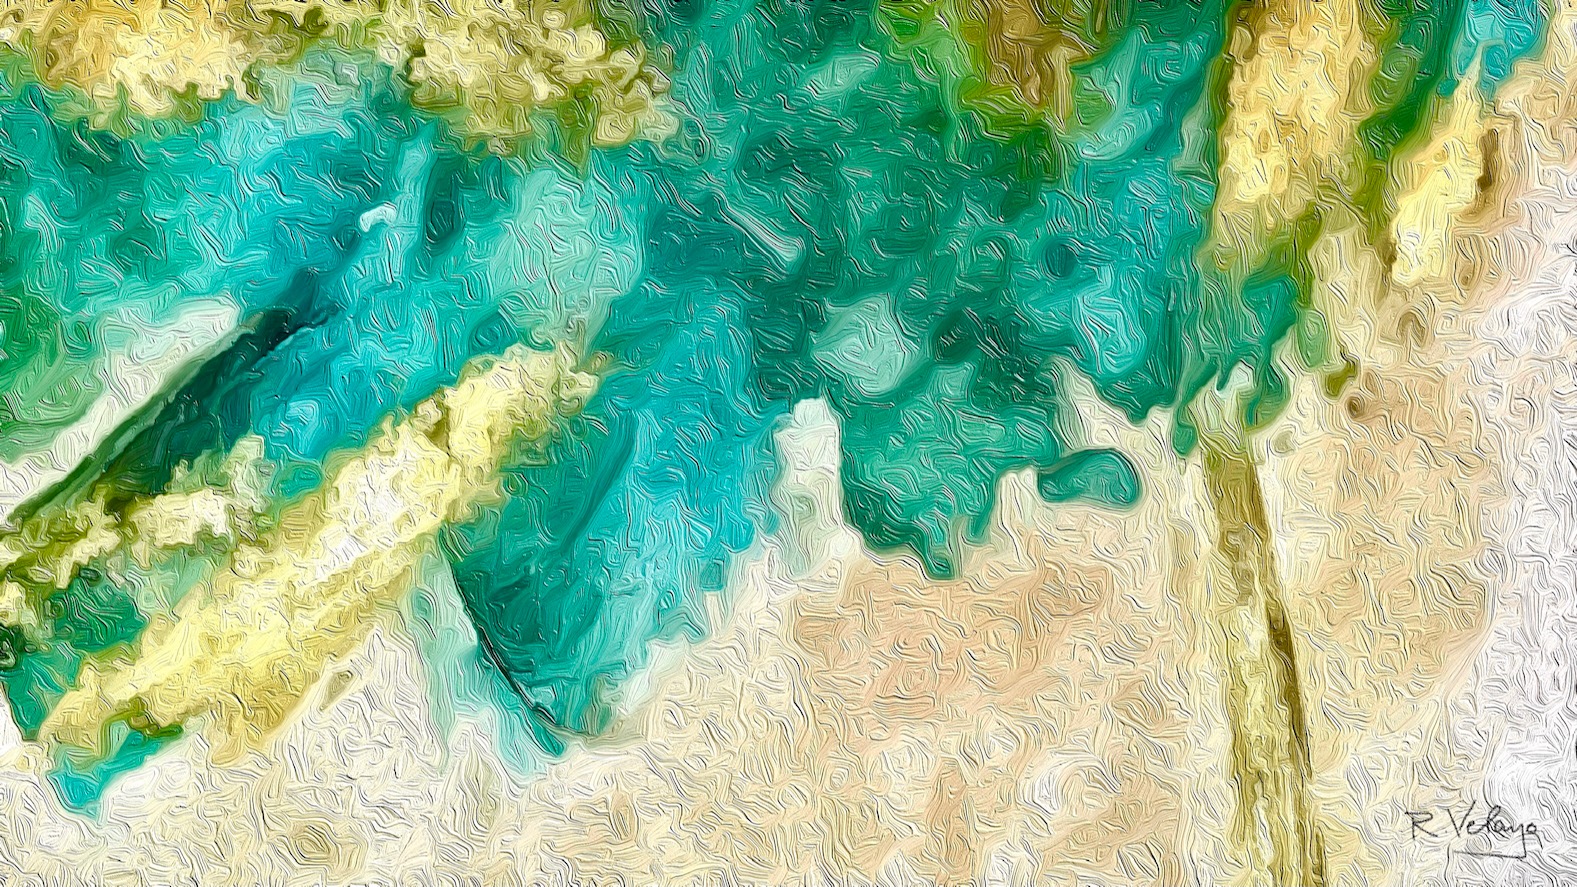 "TURQUOISE AND GOLD" [Created: 4/18/2021]